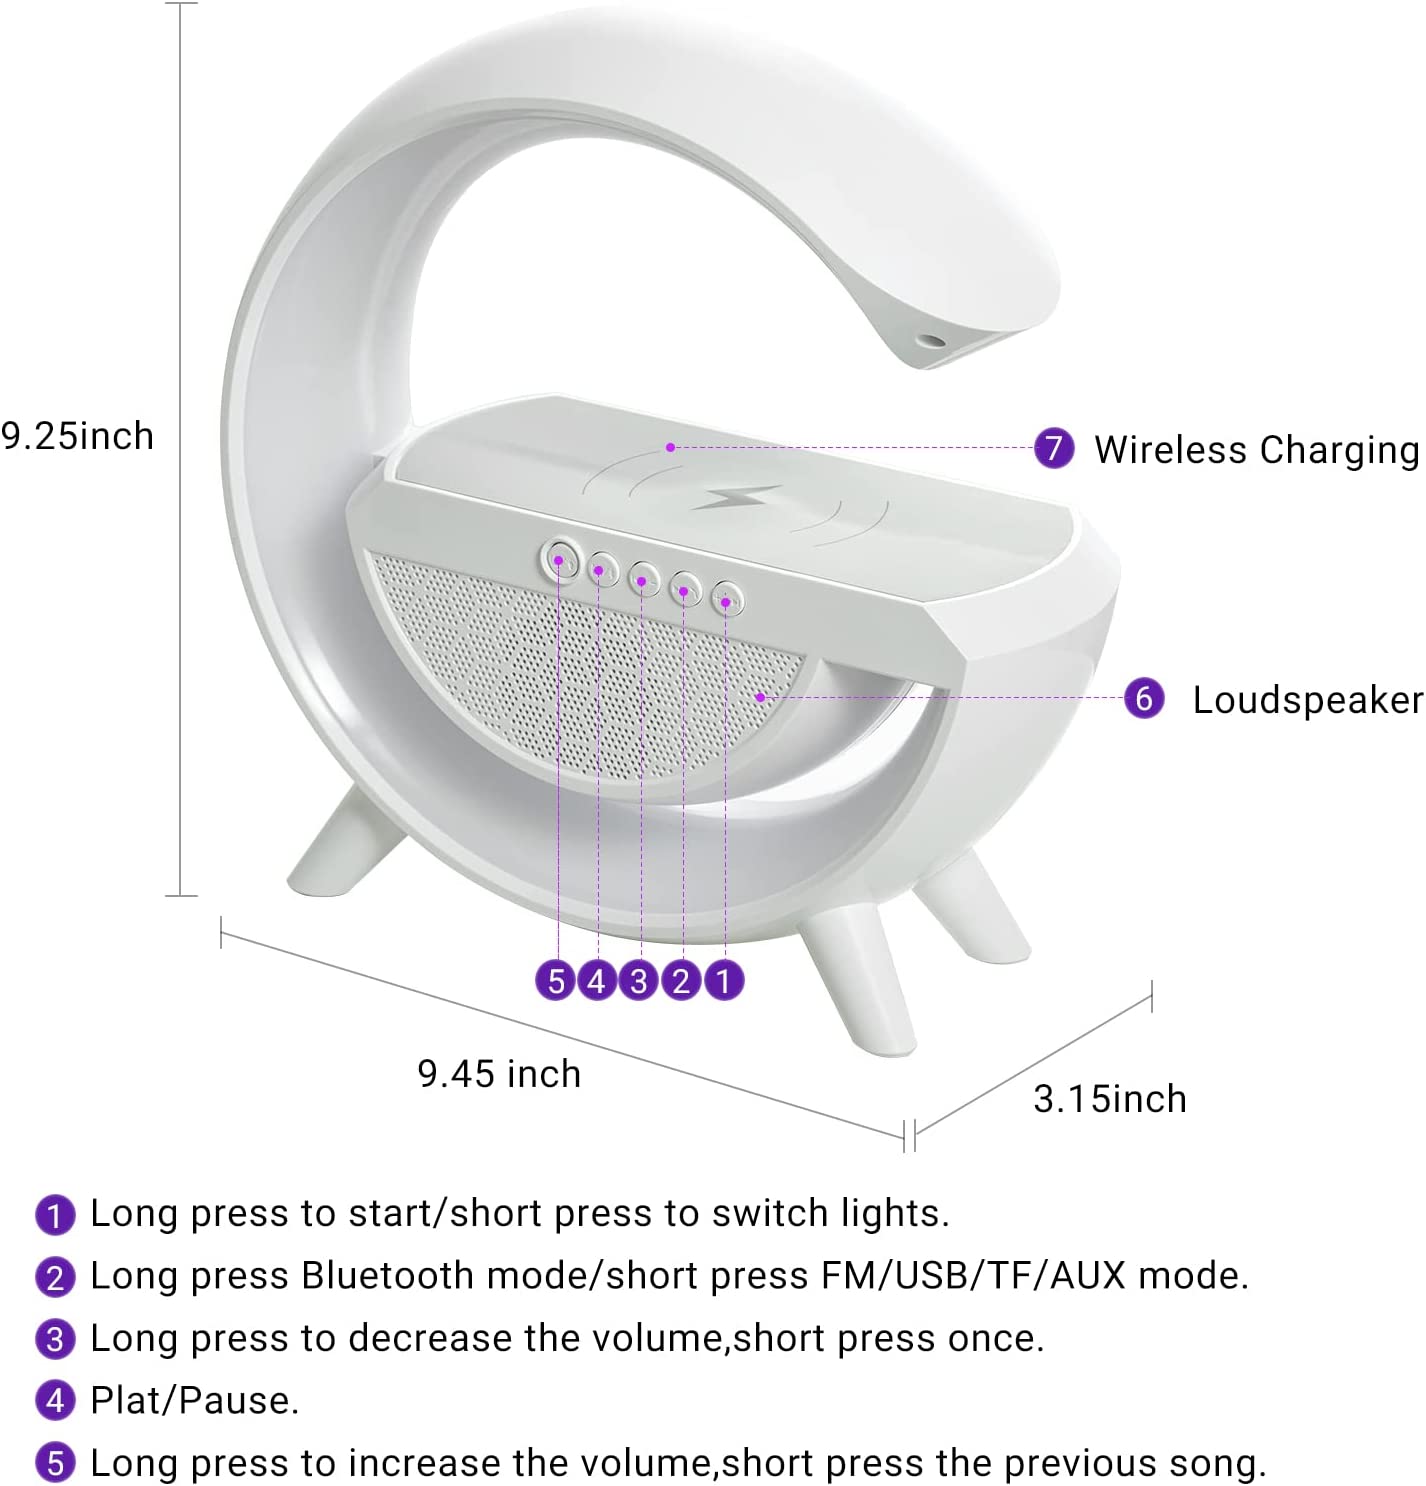 Premium Lamp Multifunctional Wireless Charger With Speaker